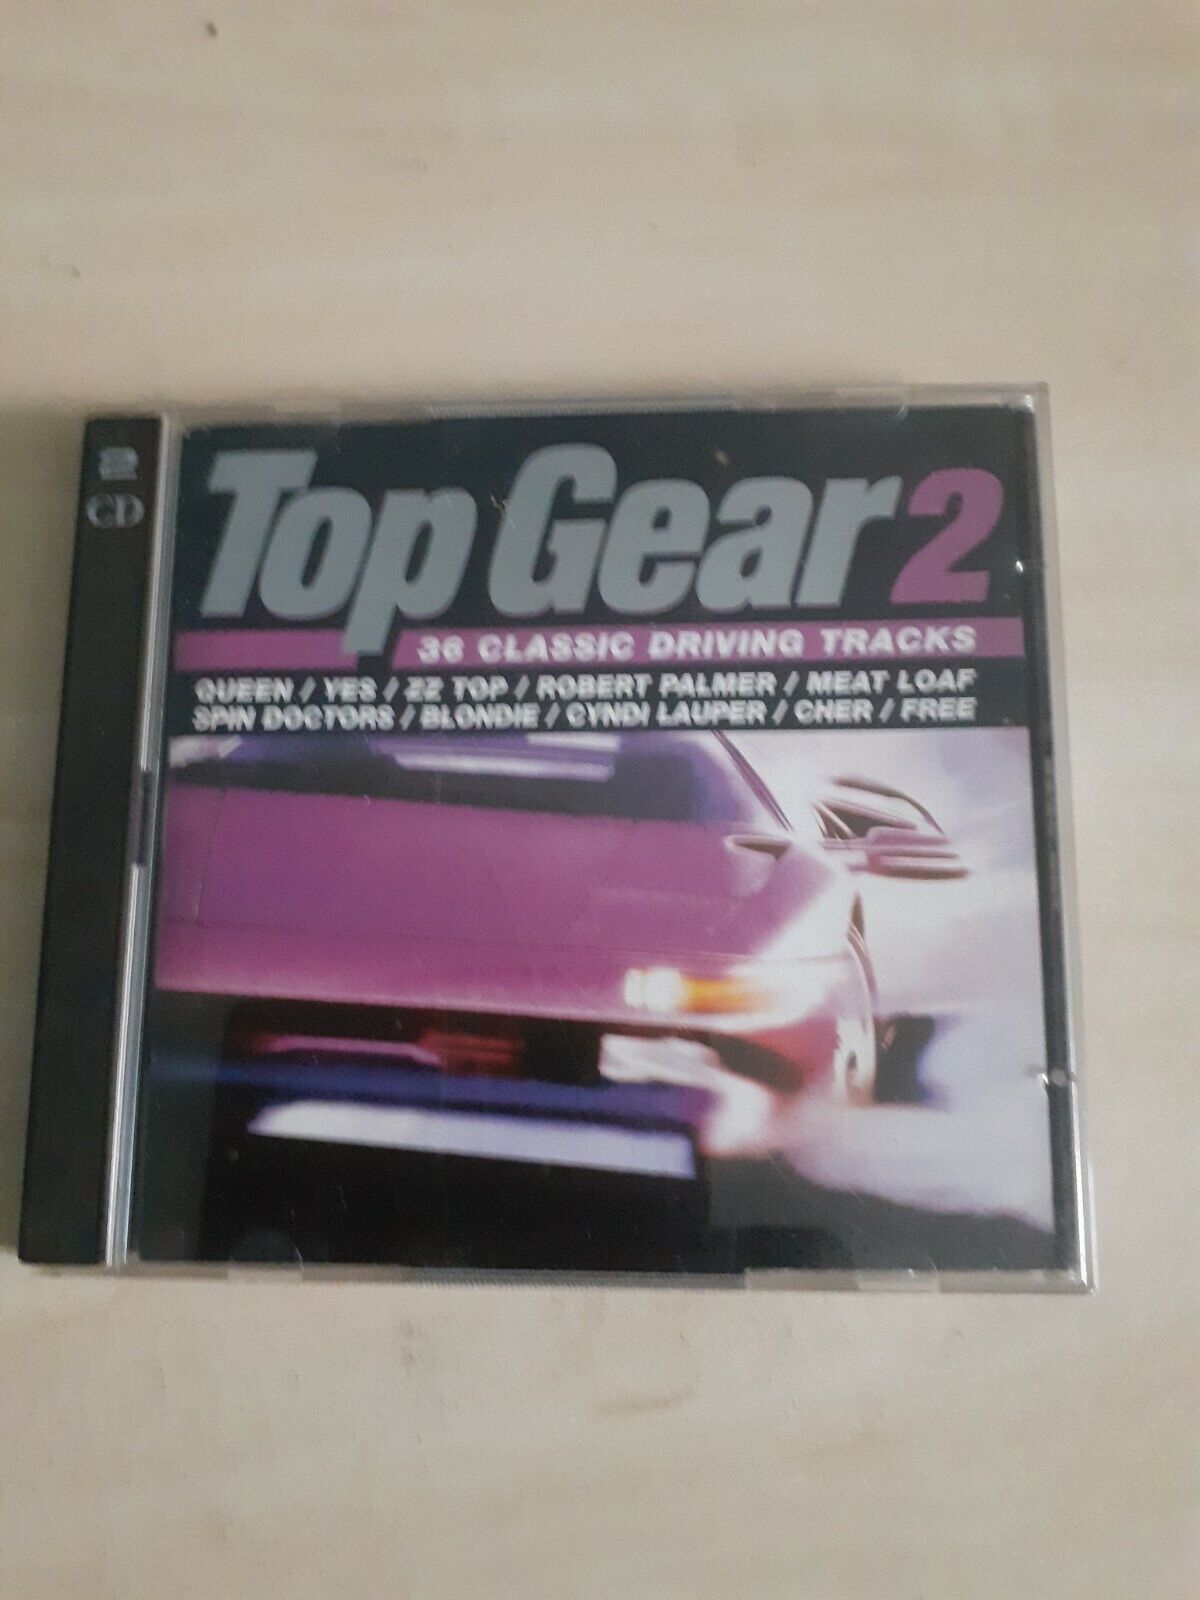 VARIOUS , Queen , Meat Loaf , Cyndi Lauper etc - Top Gear 2 (Double CD Album) 